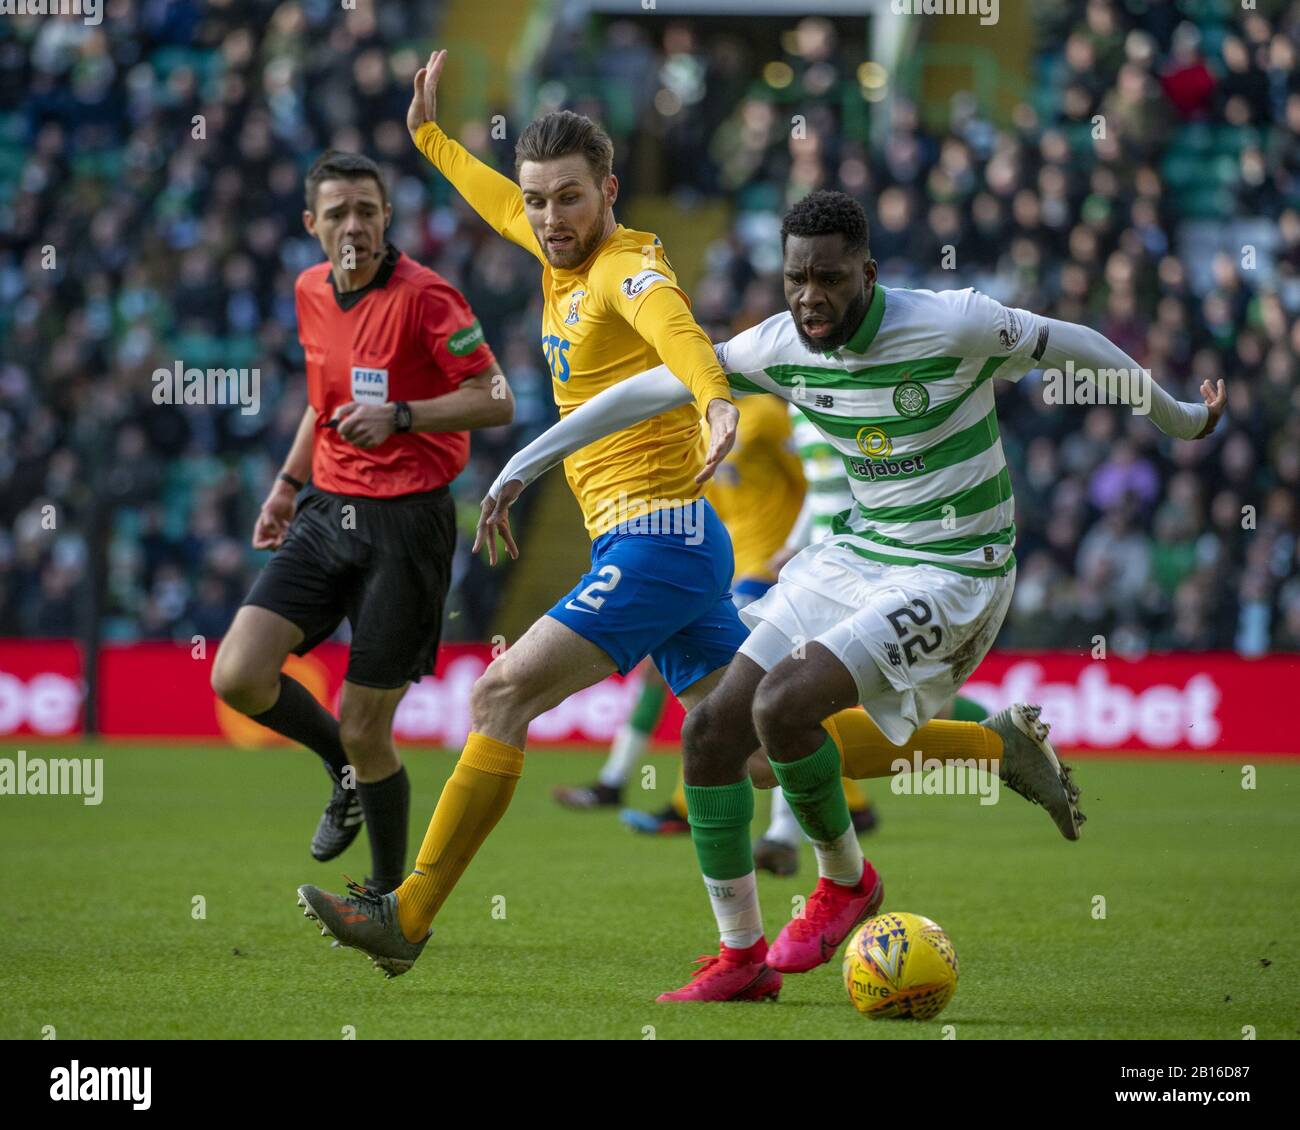 Glasgow, UK. 23rd Feb, 2020. GLASGOW, SCOTLAND, FEB 23rd: Odsonne Edouard of Celtic battles with Stephen O'Donnell of Kilm during the Scottish Premiership game between Celtic and Kilmarnock. The game took place at Celtic Park in Parkhead, Glasgow, Scotland. Richard Callis/ SPP Credit: SPP Sport Press Photo. /Alamy Live News Stock Photo